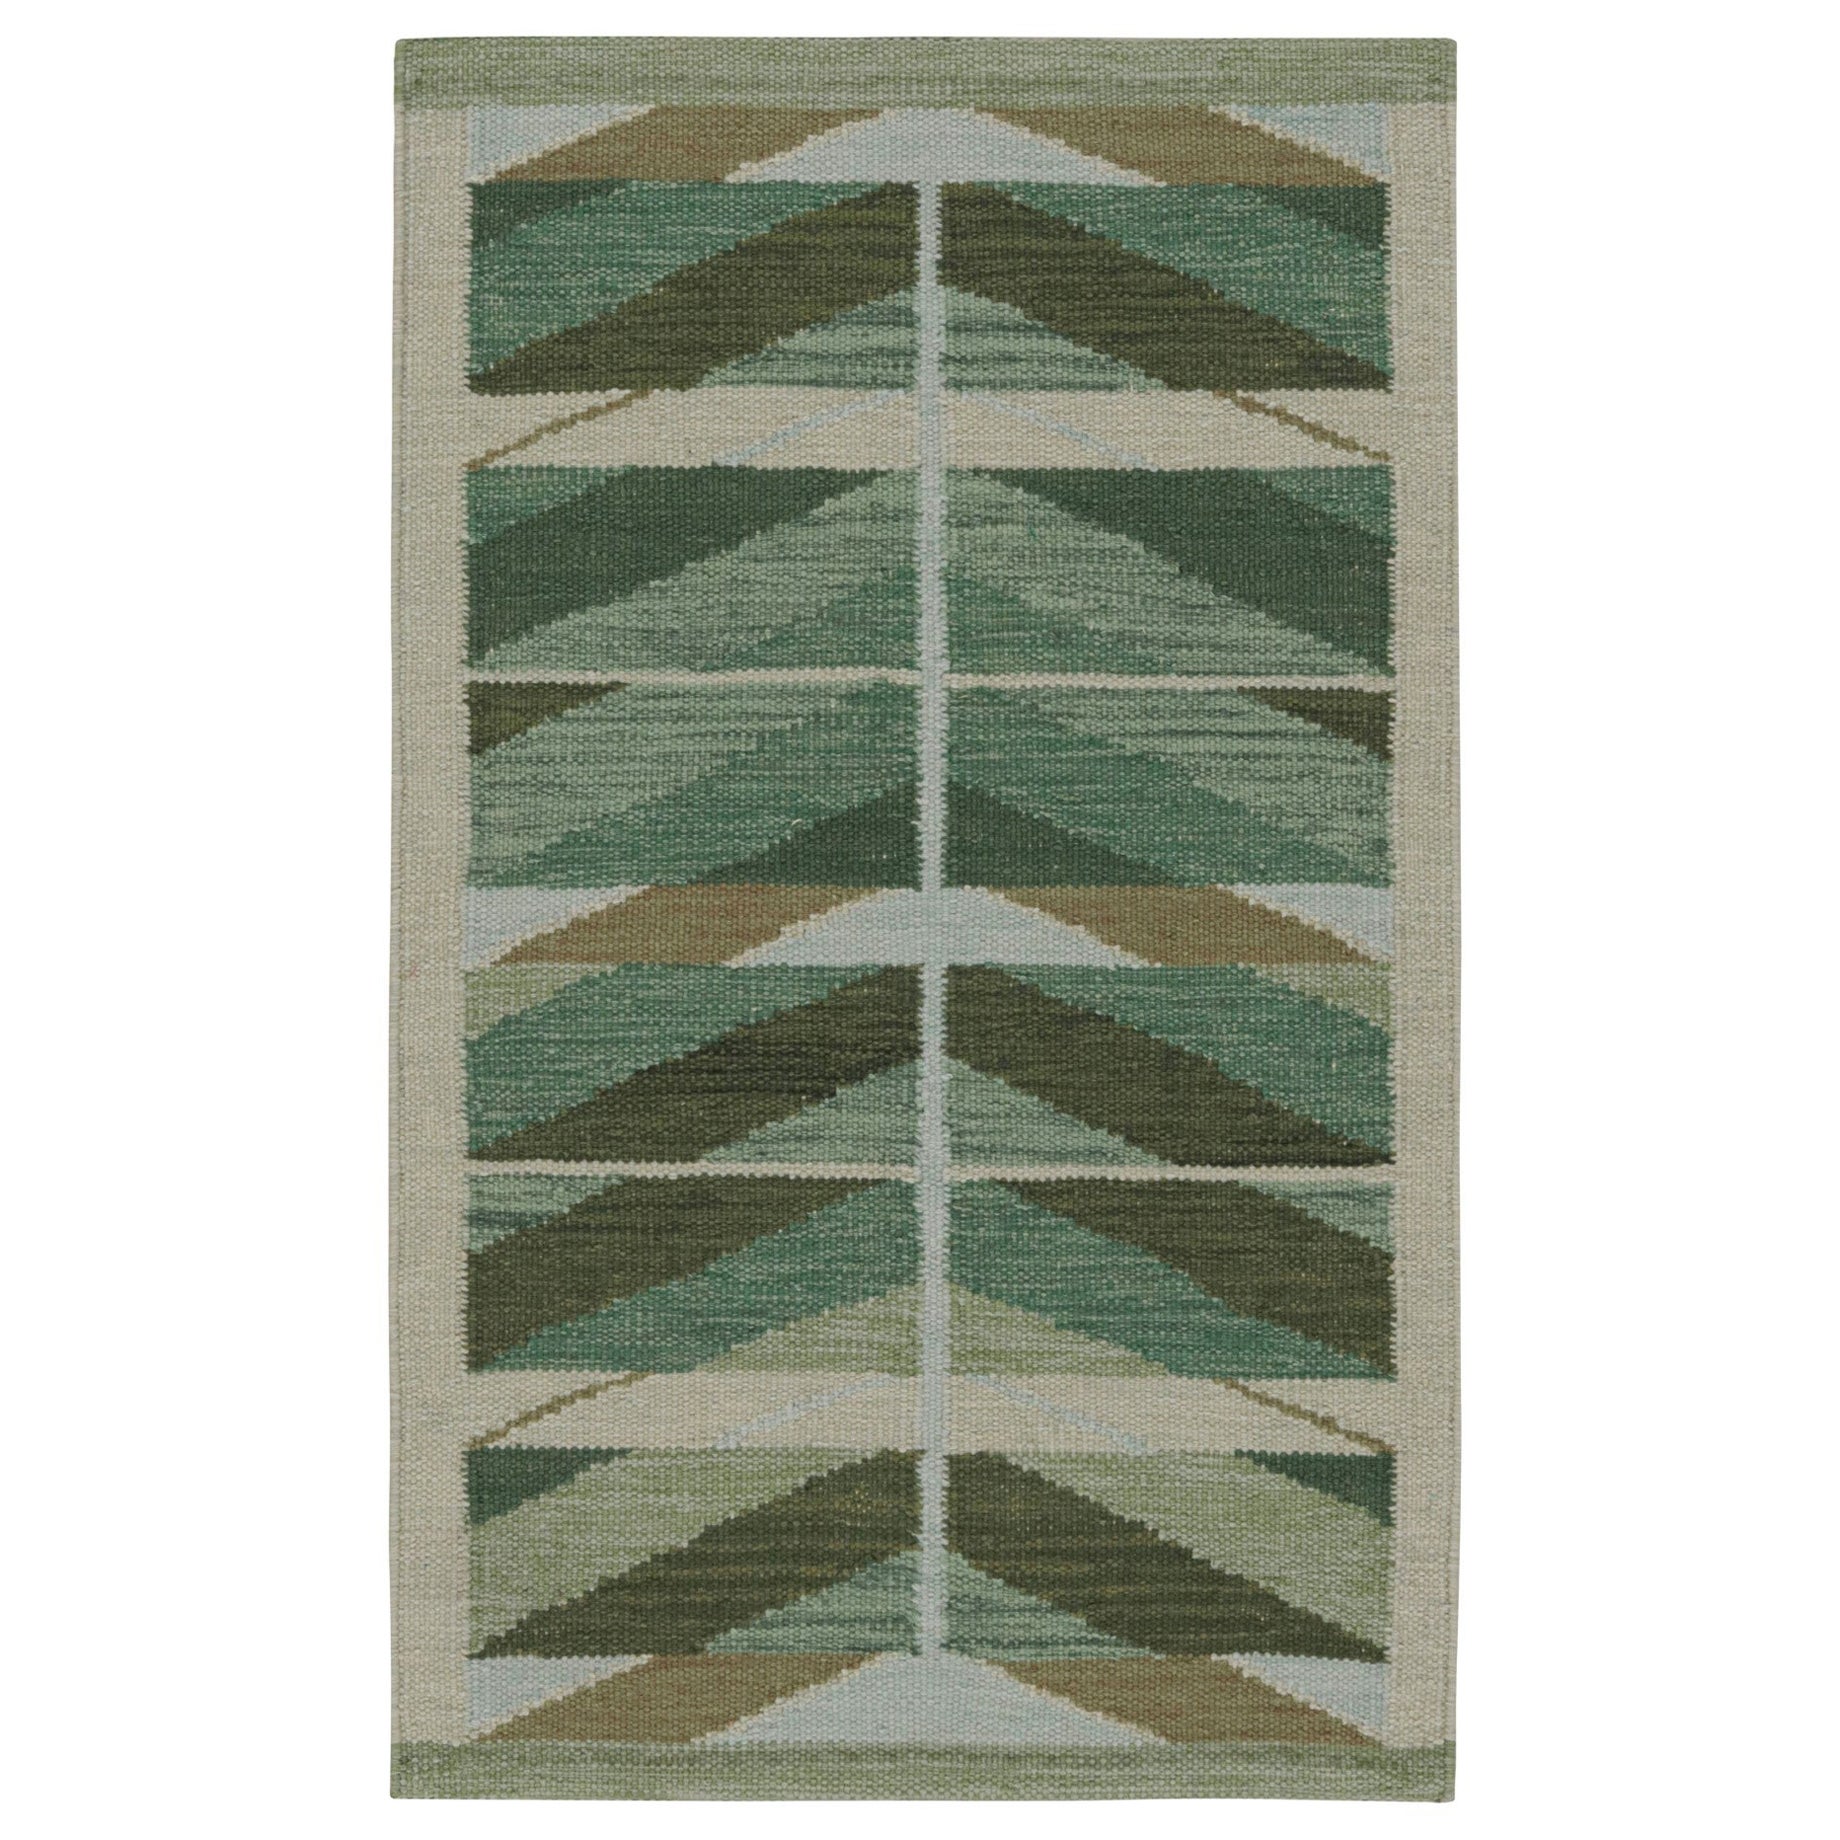 Rug & Kilim’s Scandinavian Style Kilim with Geometric Patterns in Tones of Green For Sale